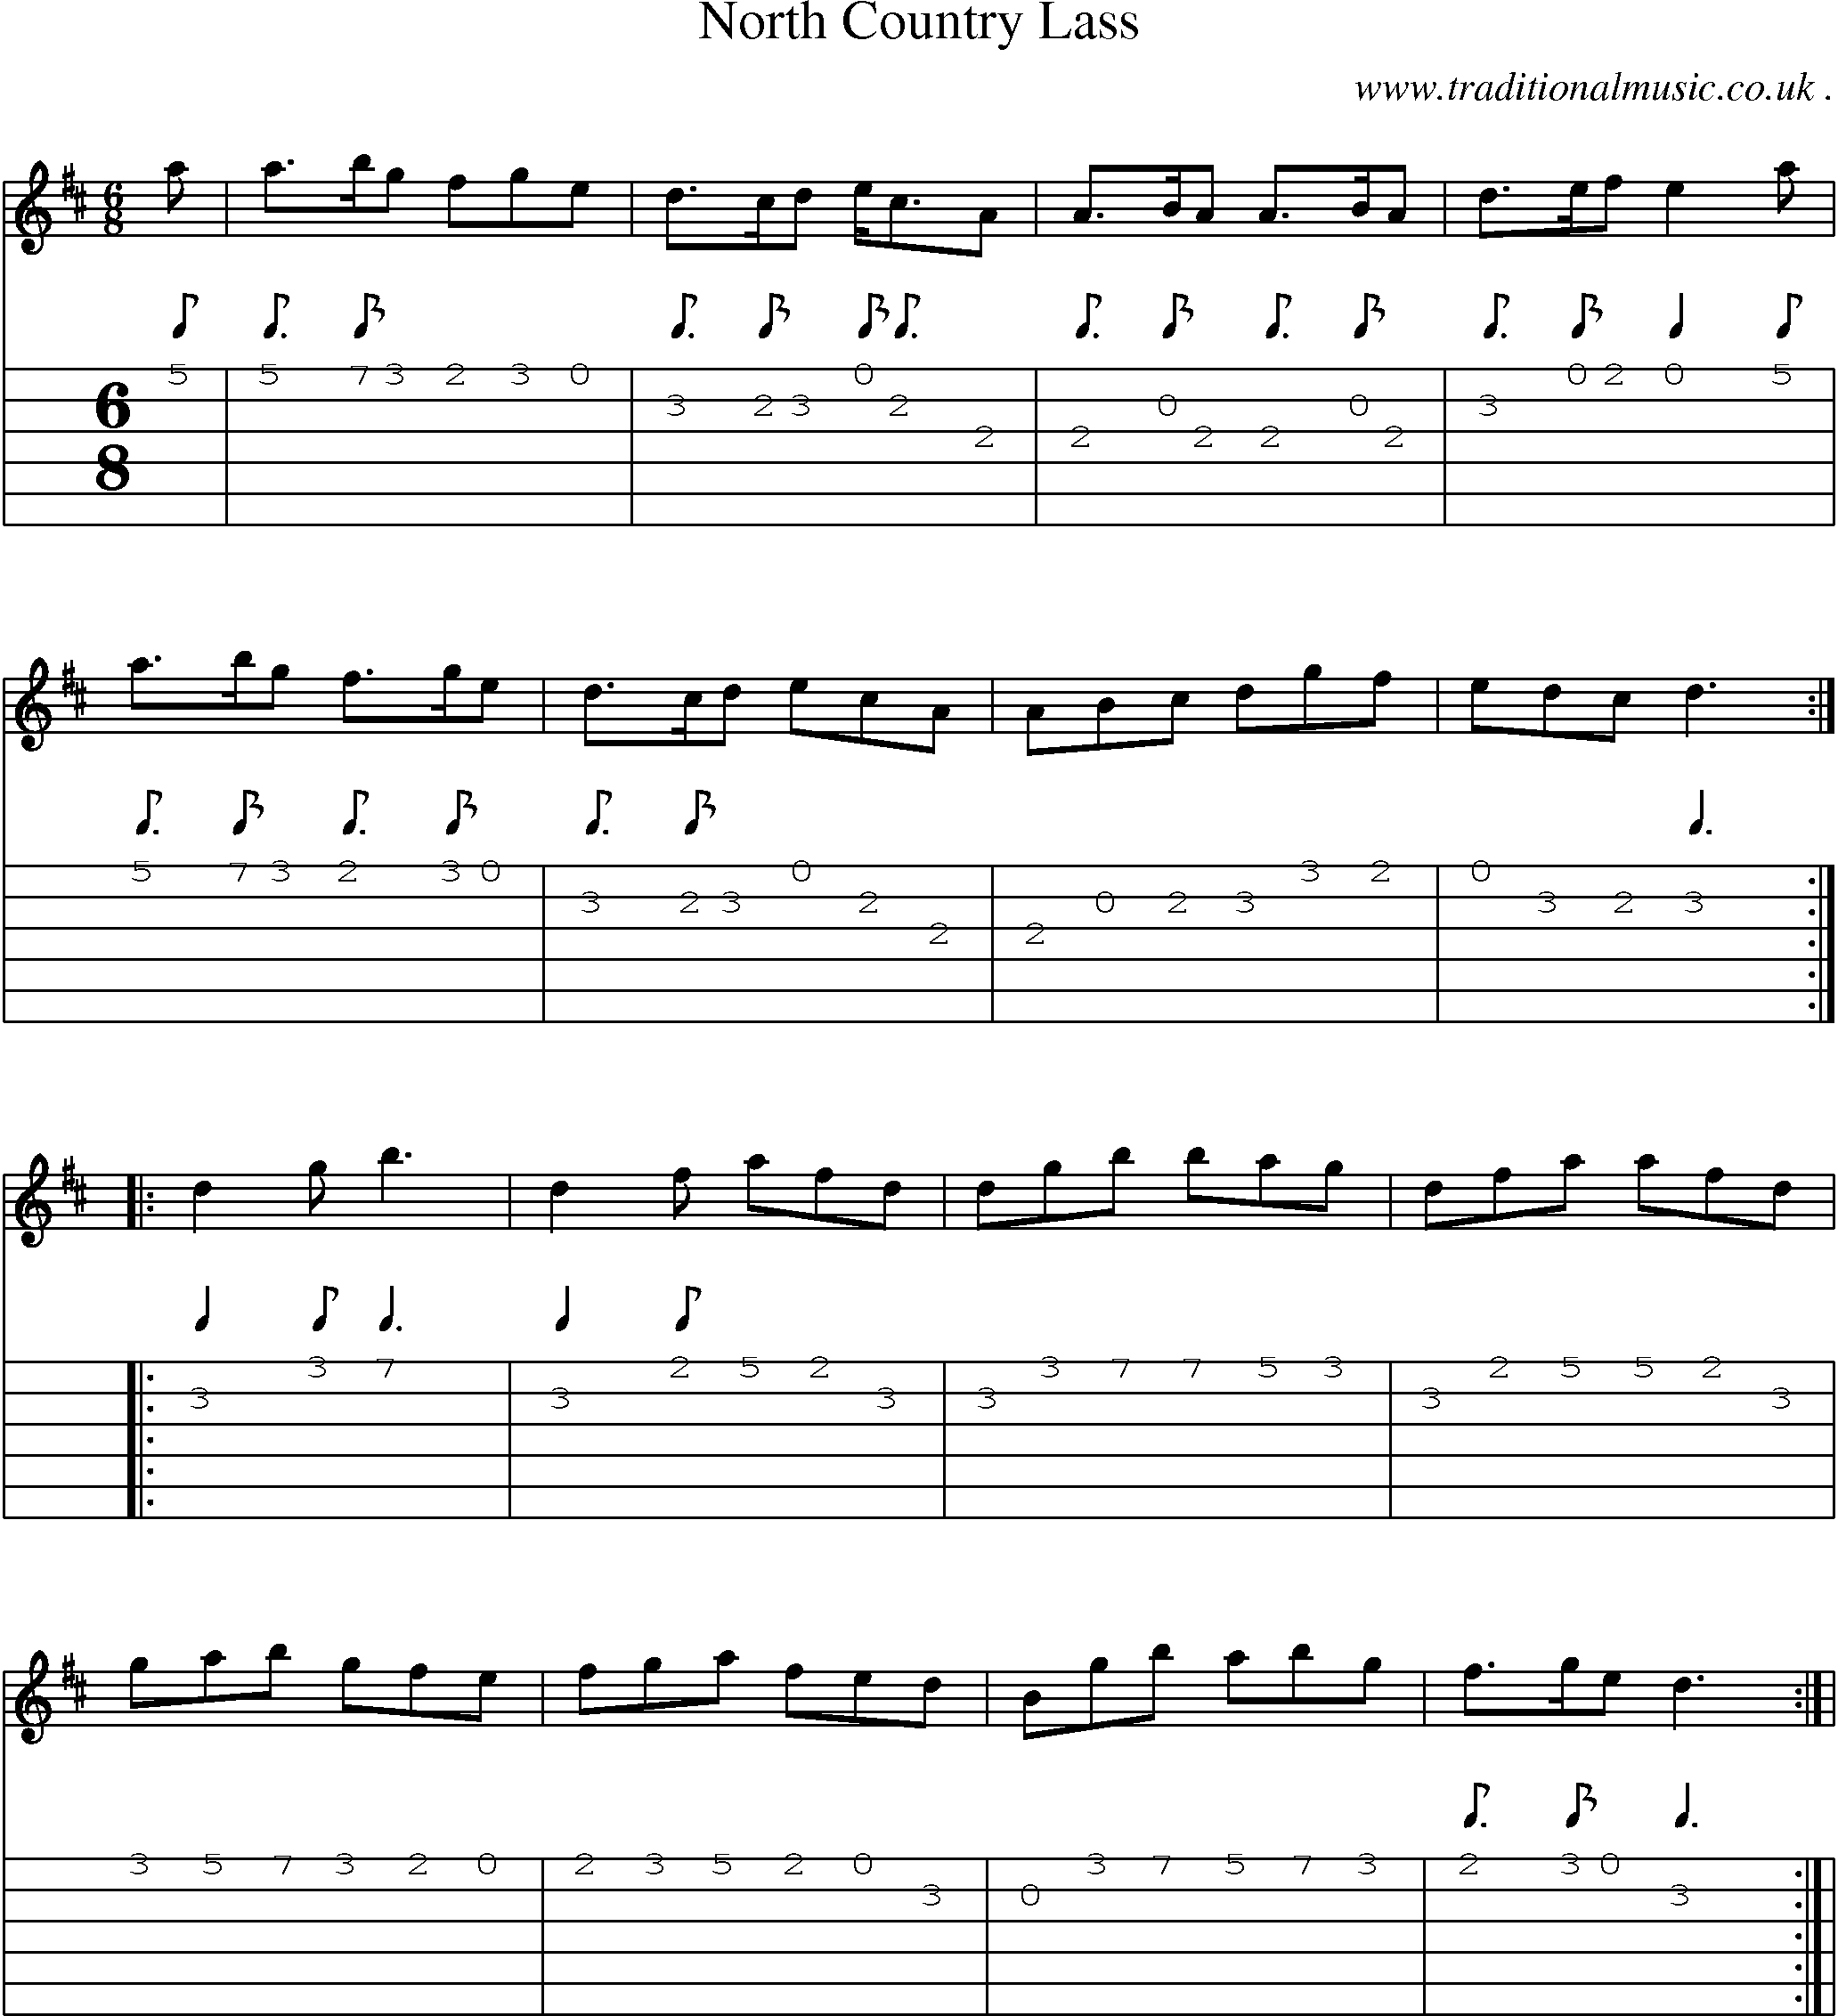 Sheet-Music and Guitar Tabs for North Country Lass